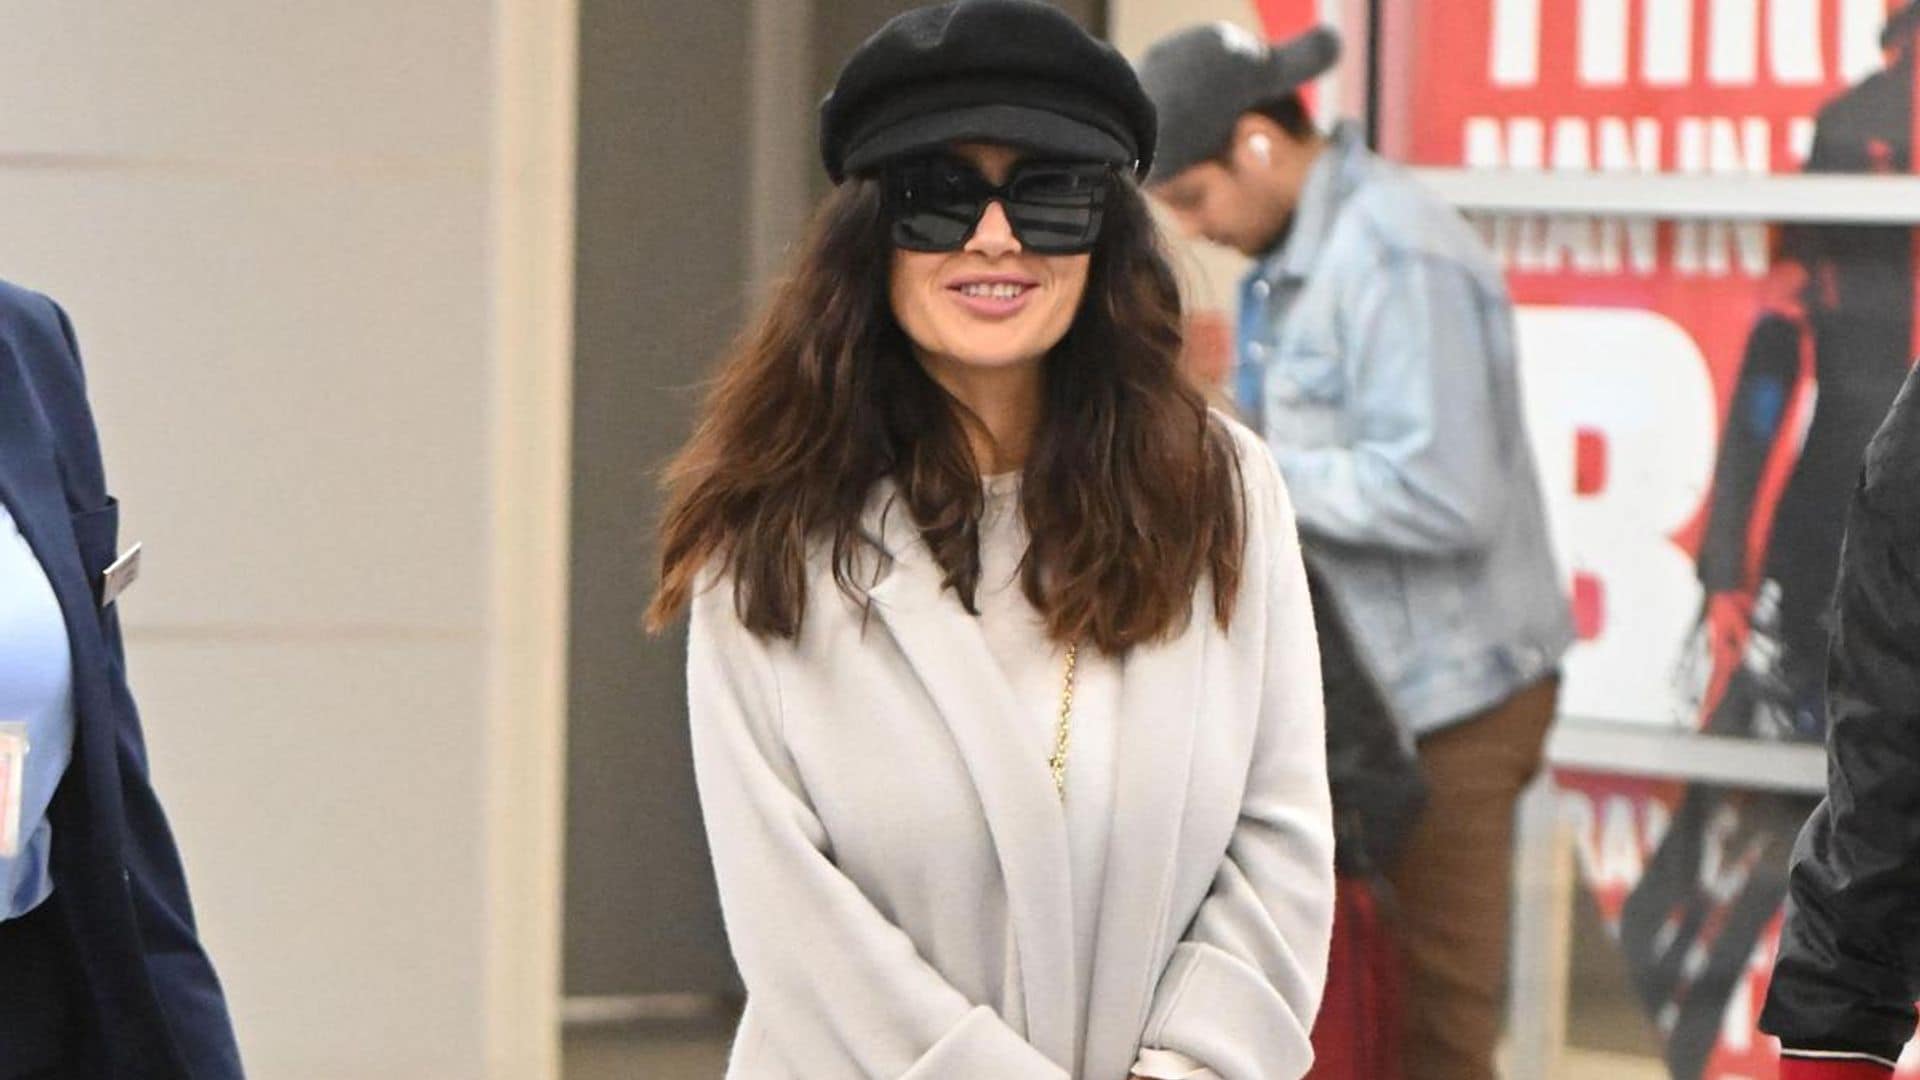 Salma Hayek’s effortless elegance shines as she touches down at JFK airport